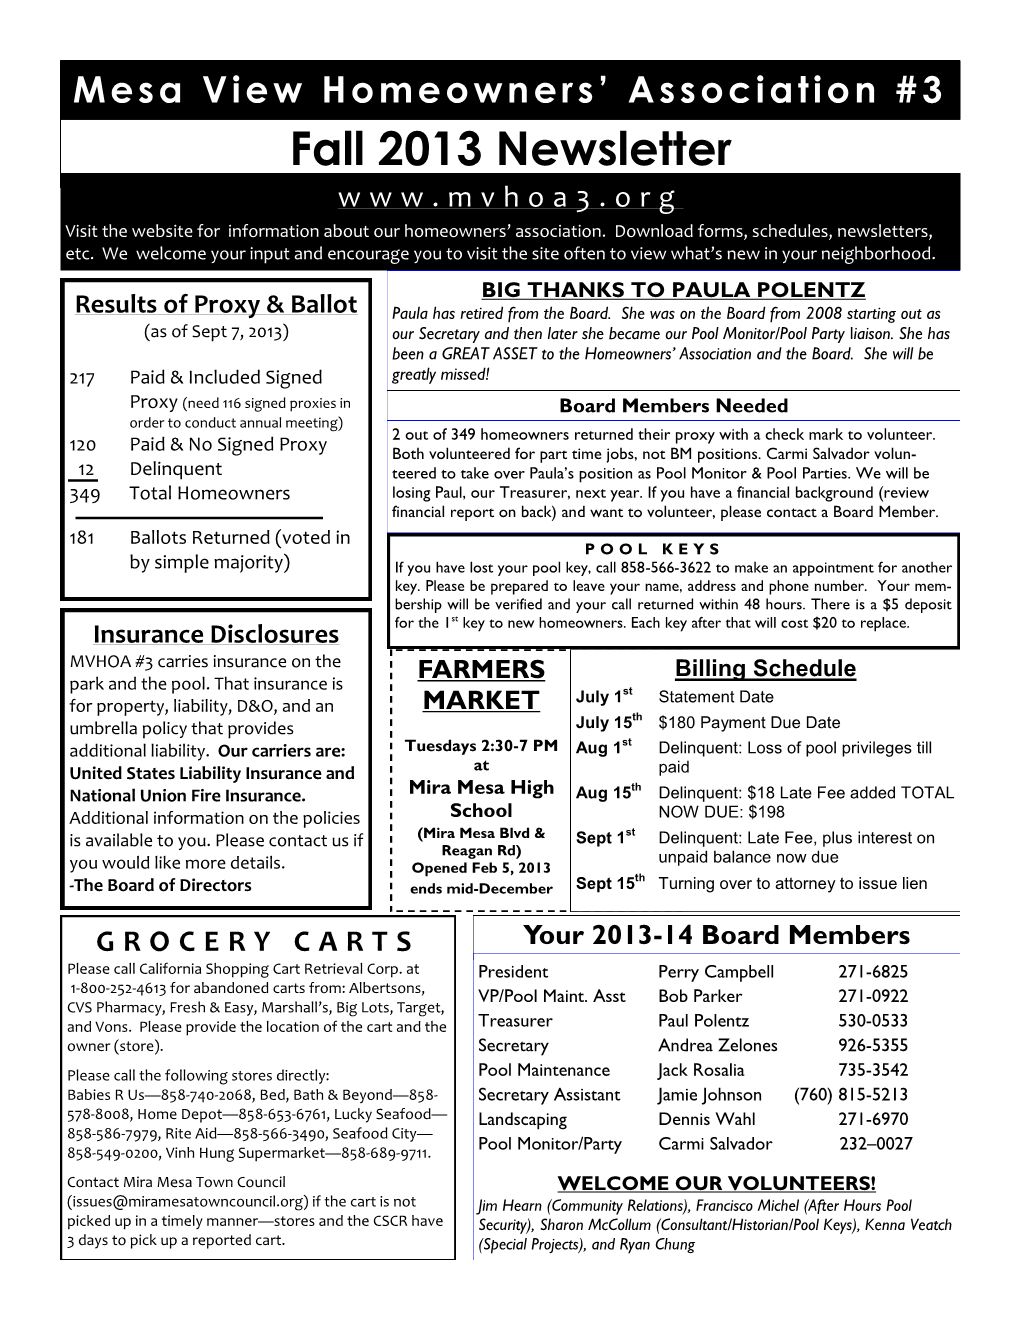 Fall 2013 Newsletter Visit the Website for Information About Our Homeowners’ Association